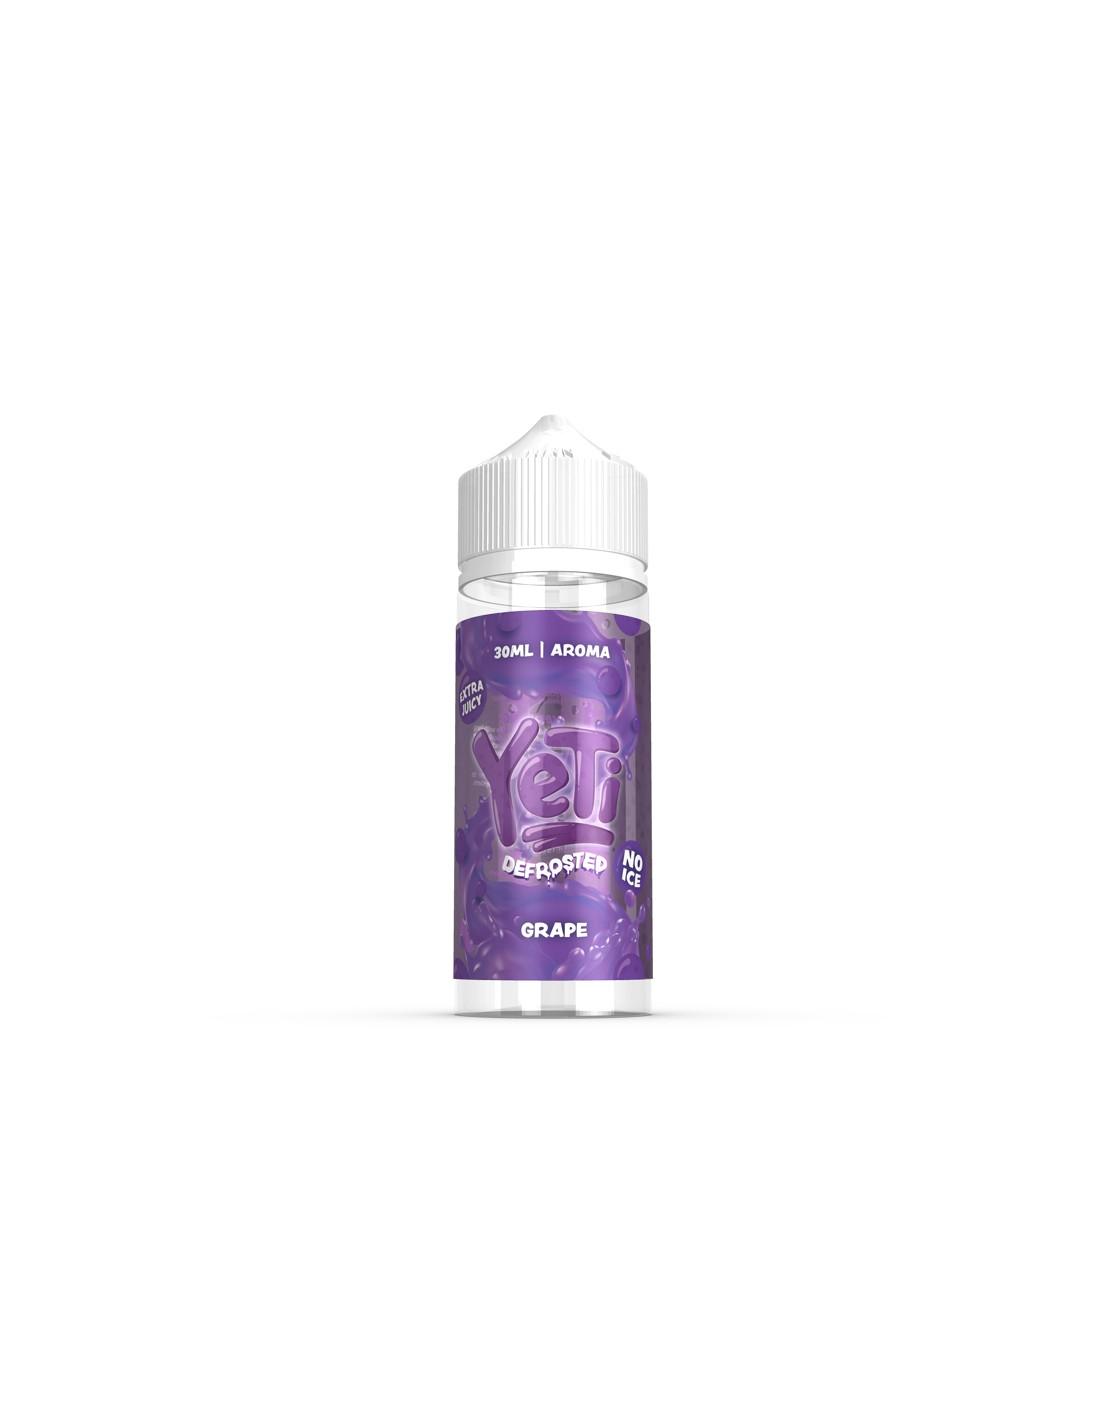 yeti-defrosted-flavour-shot-grape120ml